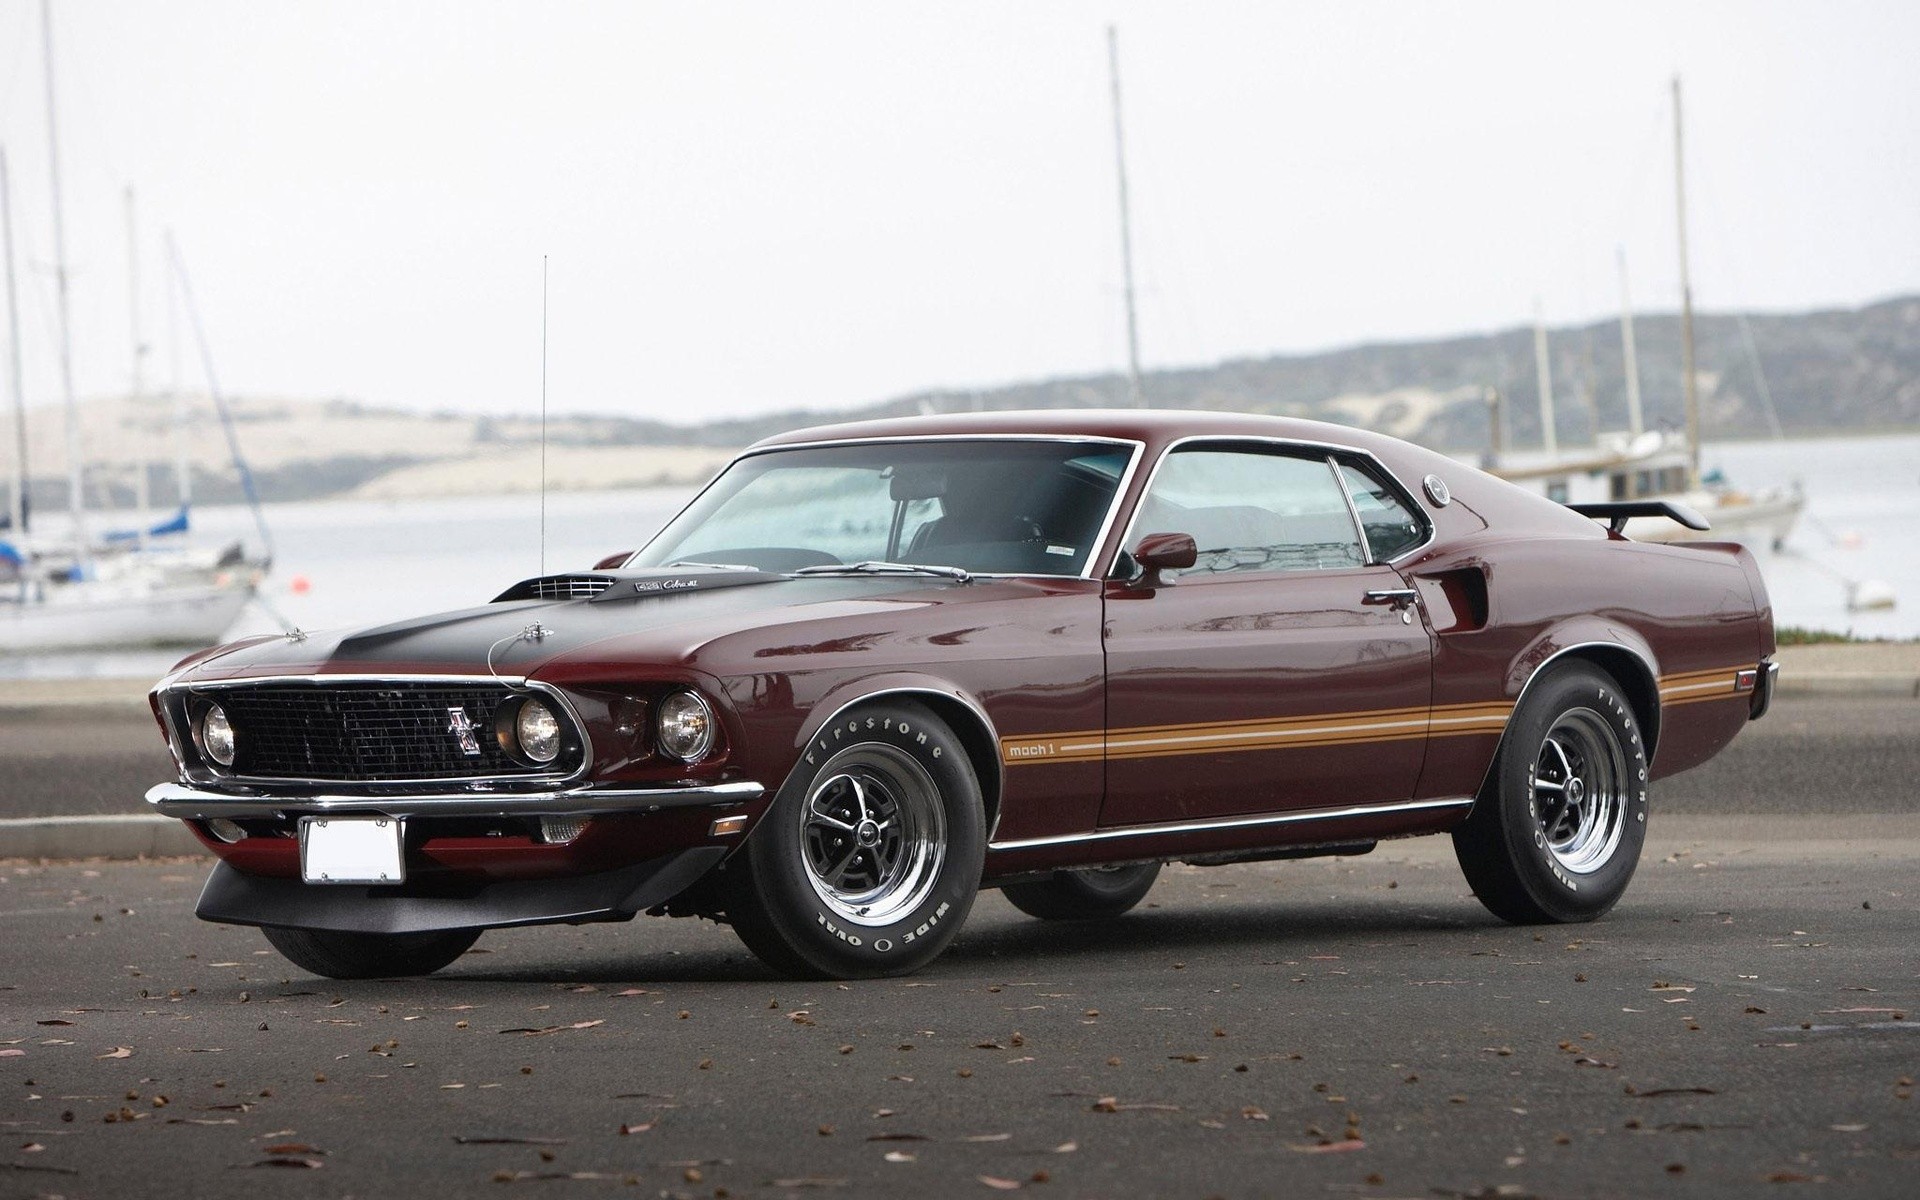 Mustang Ford Mach Cobra Jet Cranberry Red Wallpaper Background